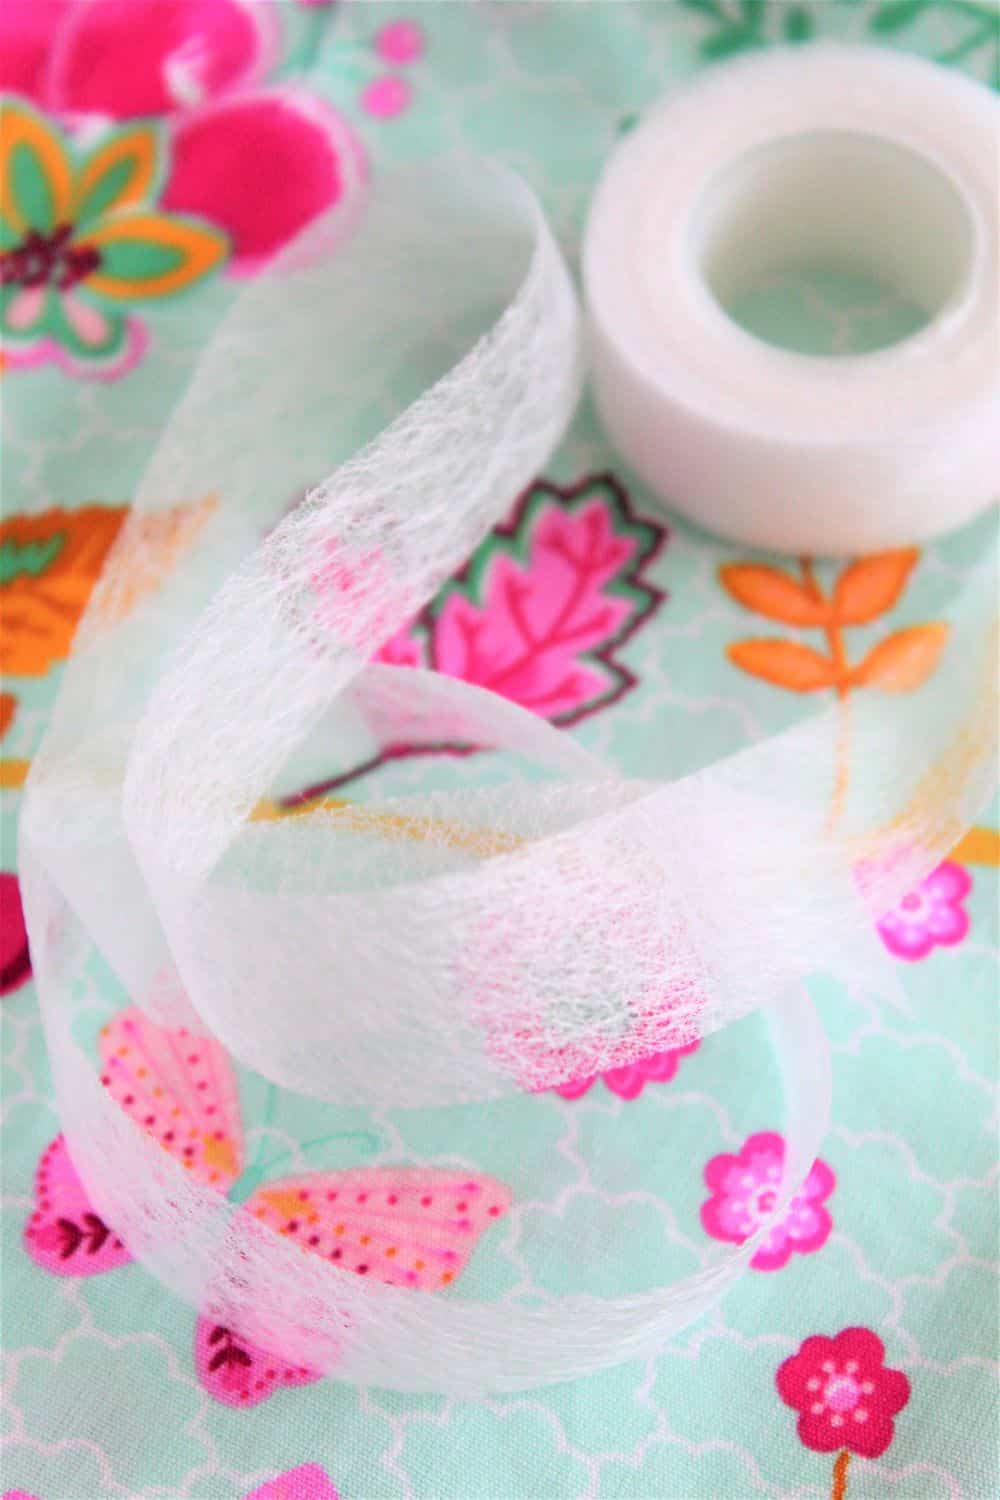 How to use hemming tape